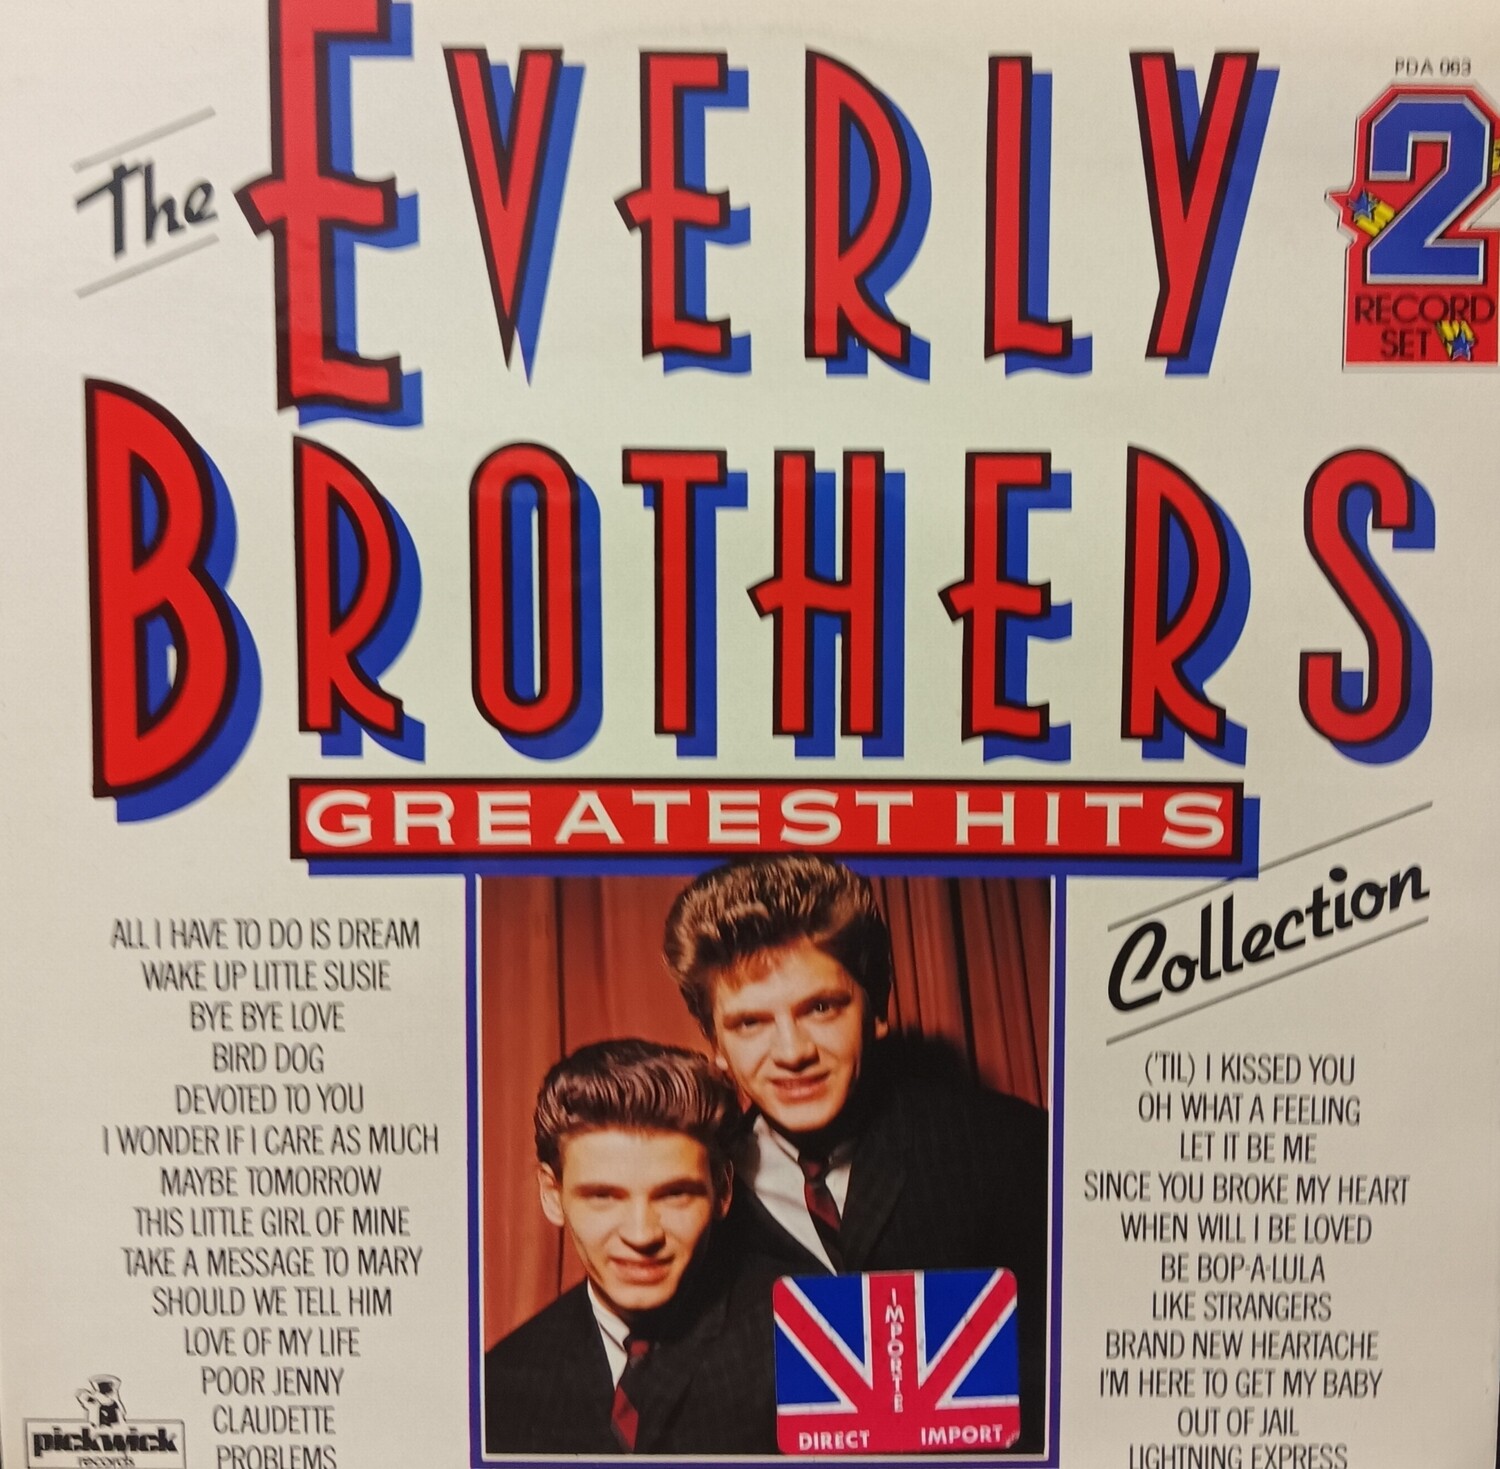 THE EVERLY BROTHERS - GREATEST HITS